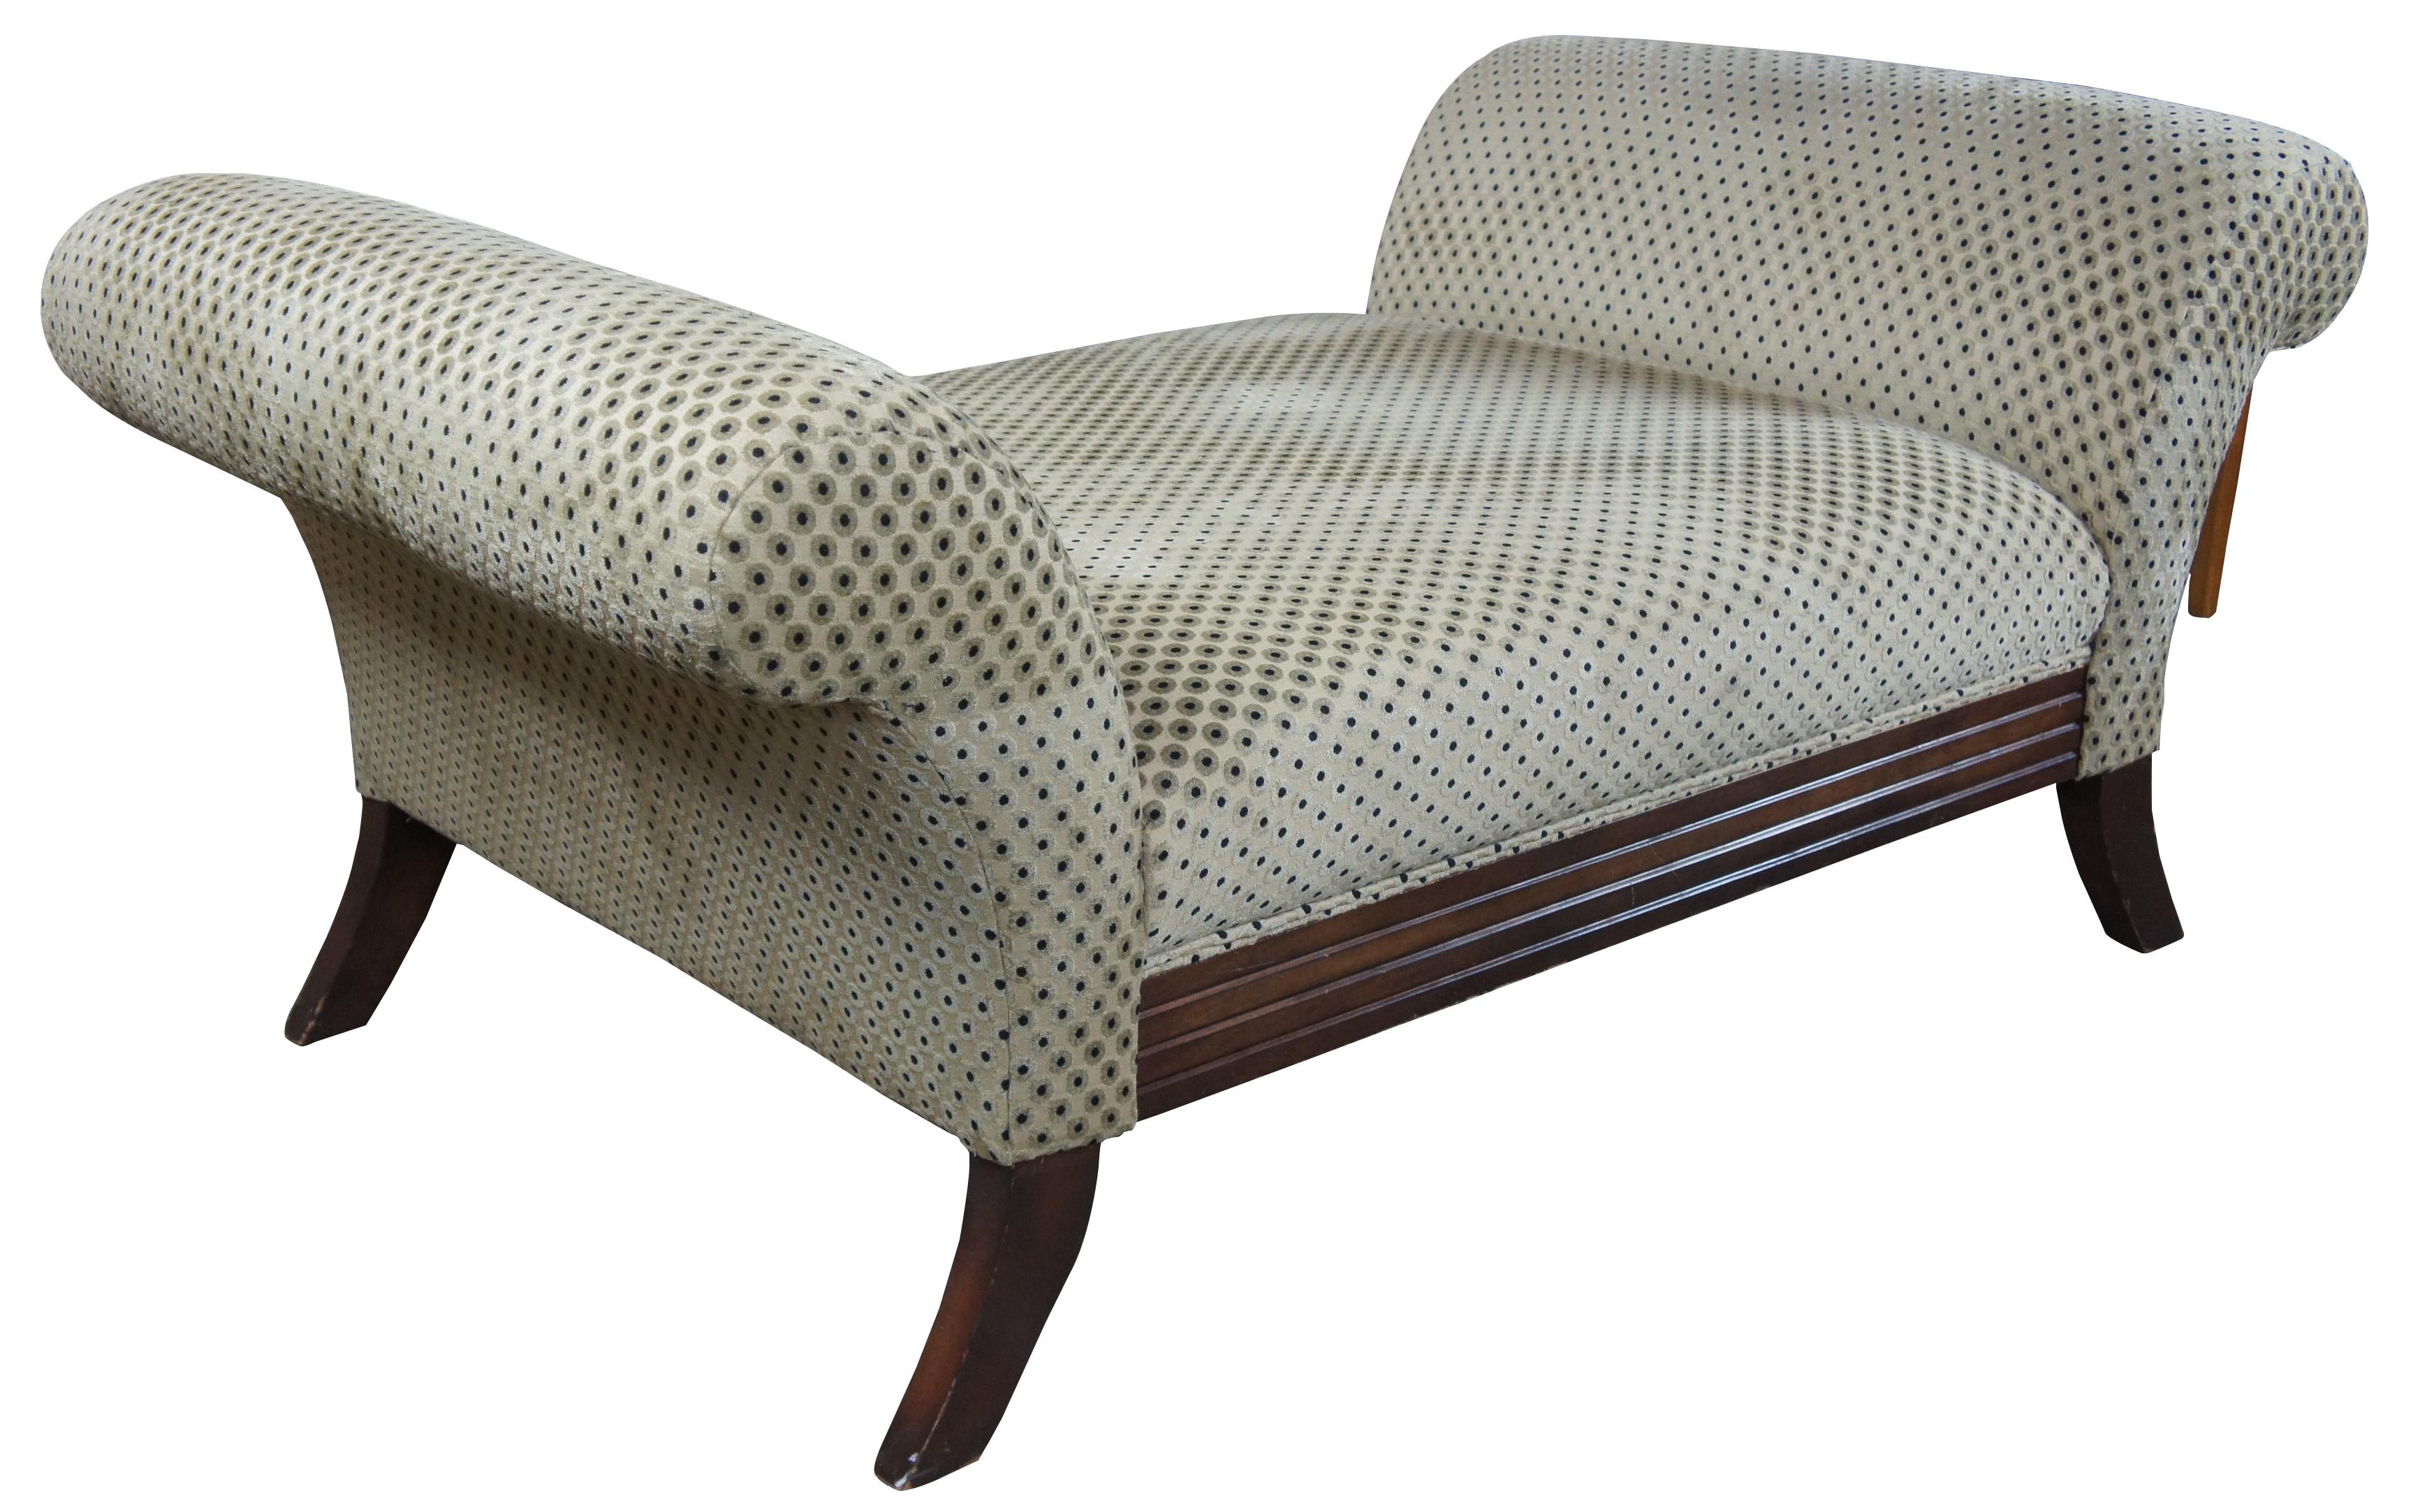 Polka dot upholstered daybed or settee. Features rolled arms over flared legs and a mahogany toned finish. Olive green and black sheened upholstery. Measure: 69